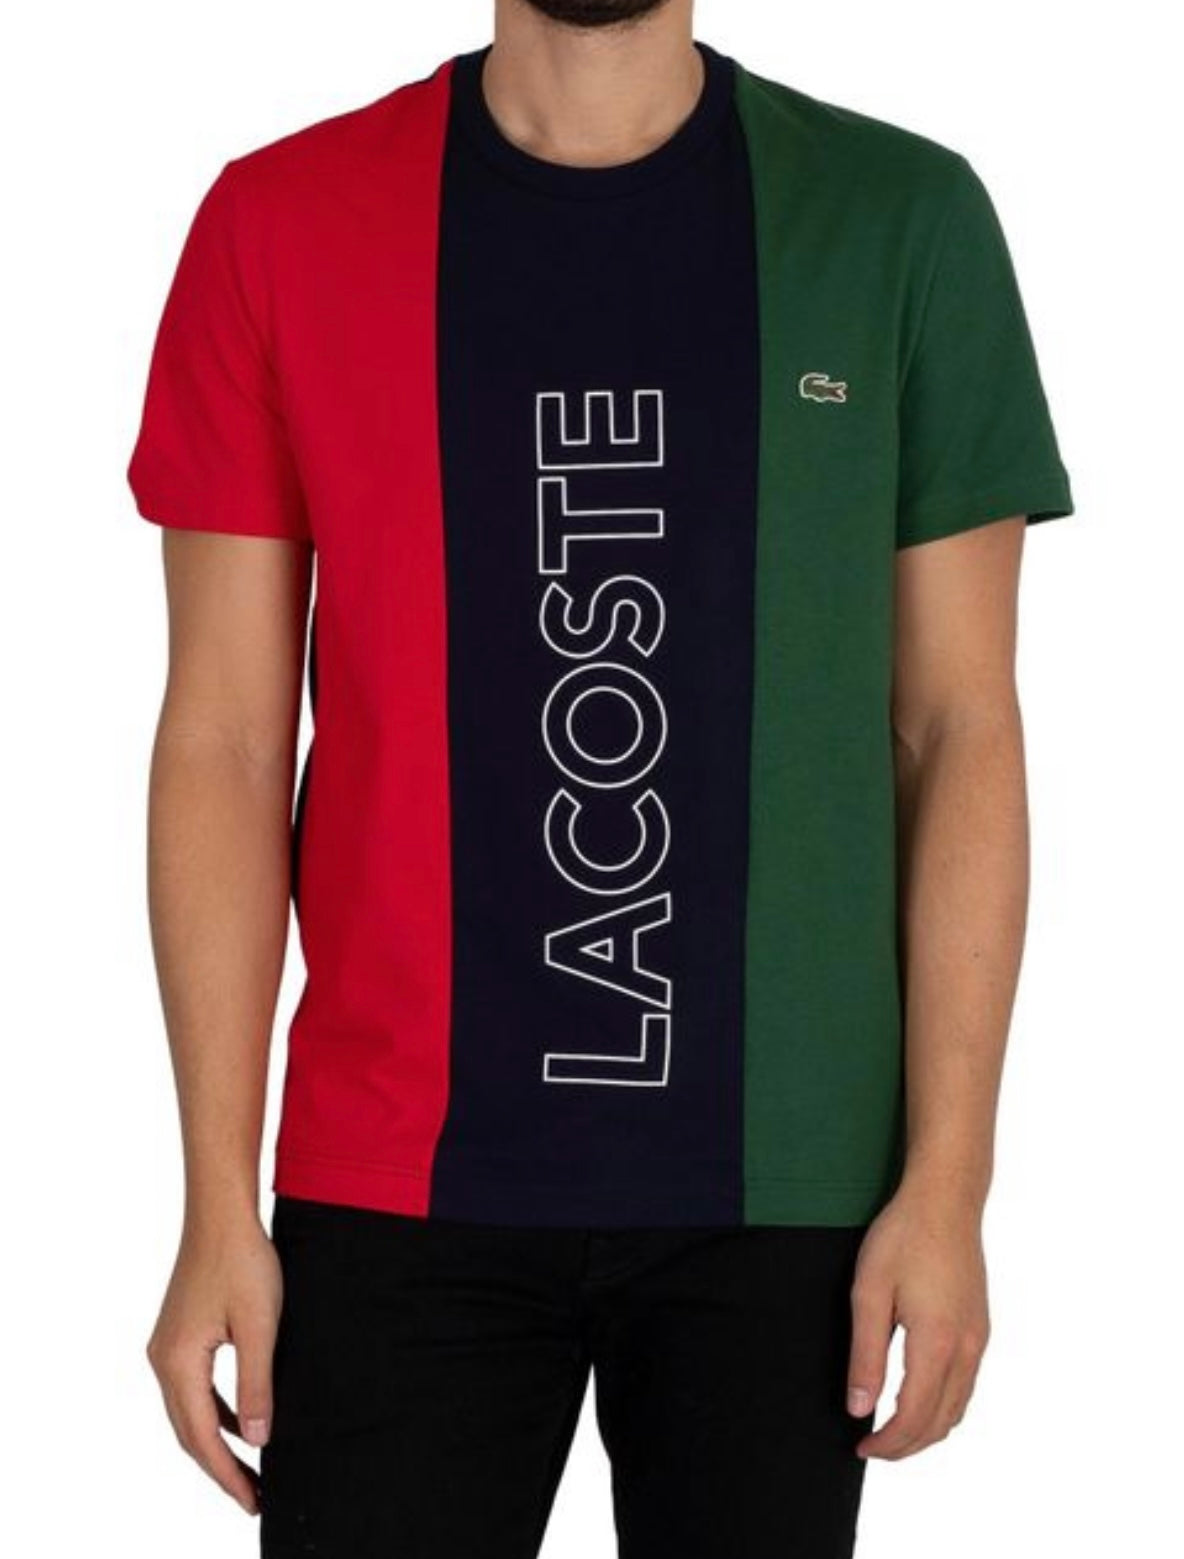 LAC GRAPHIC PANEL T-SHIRT